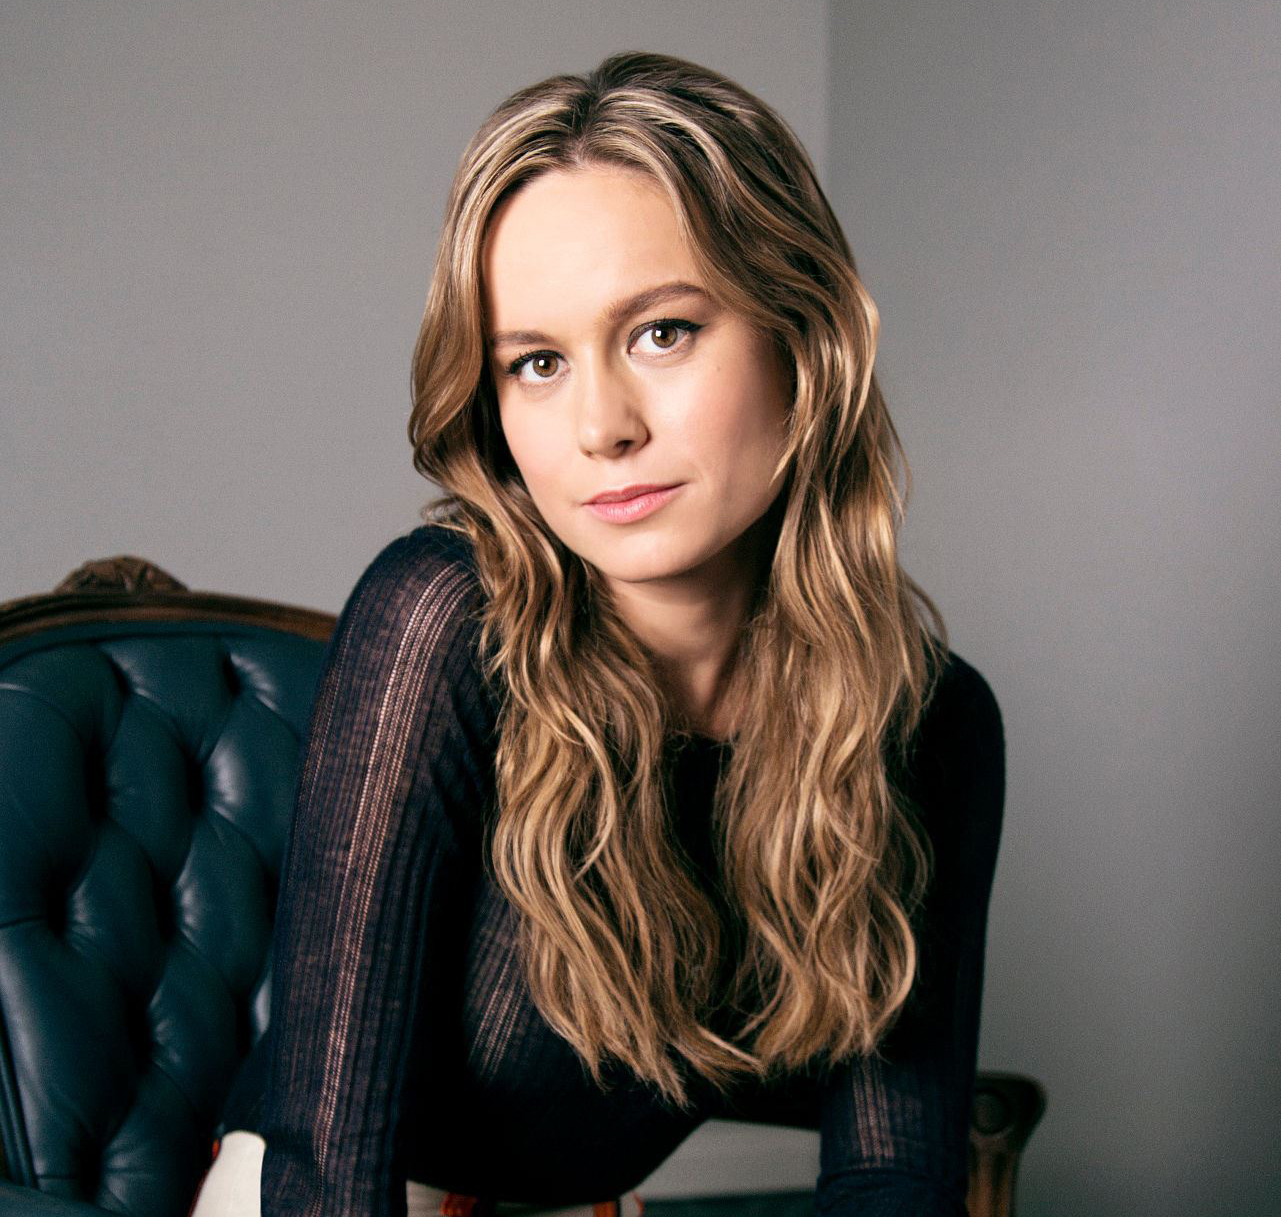 Session Los Angeles Times Adoring Brie Larson Photo Archives